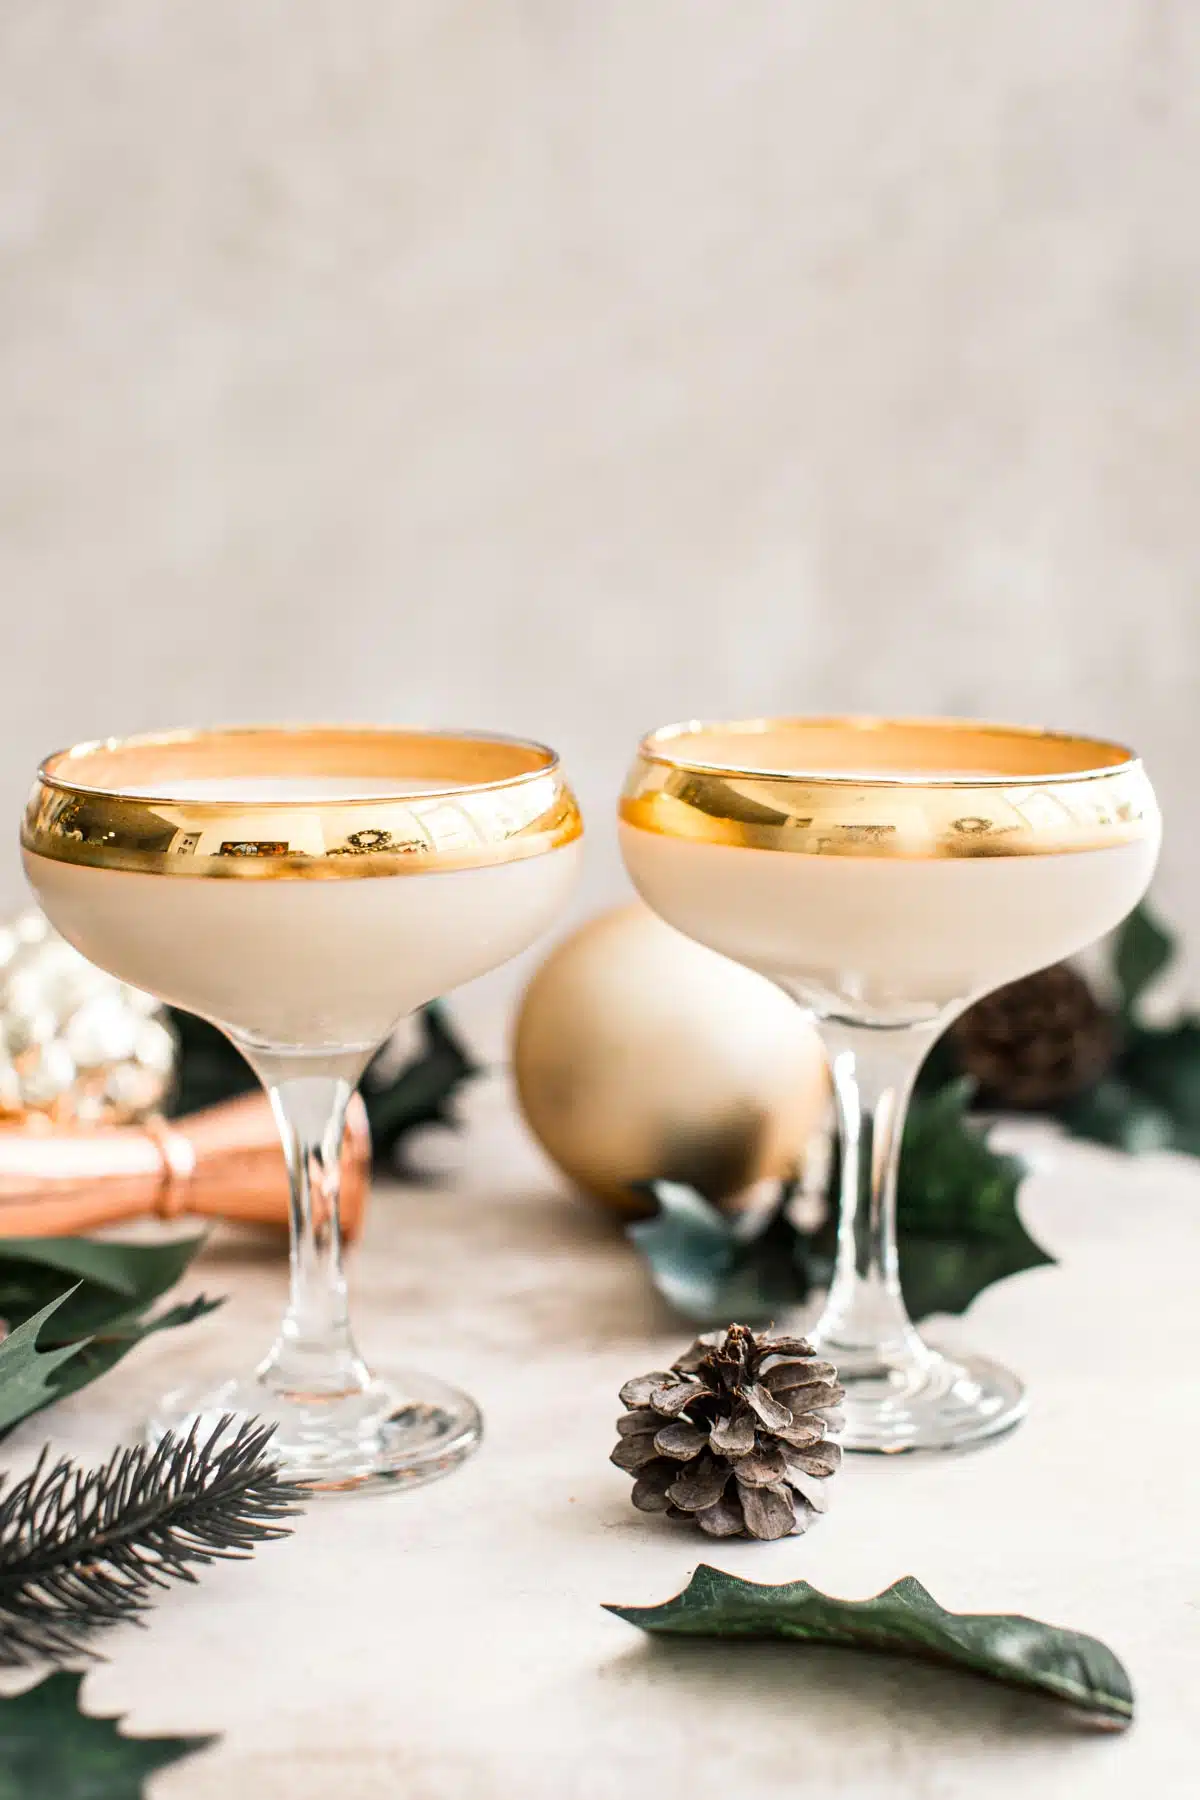 Two toasted almond martini glasses with gold rims.